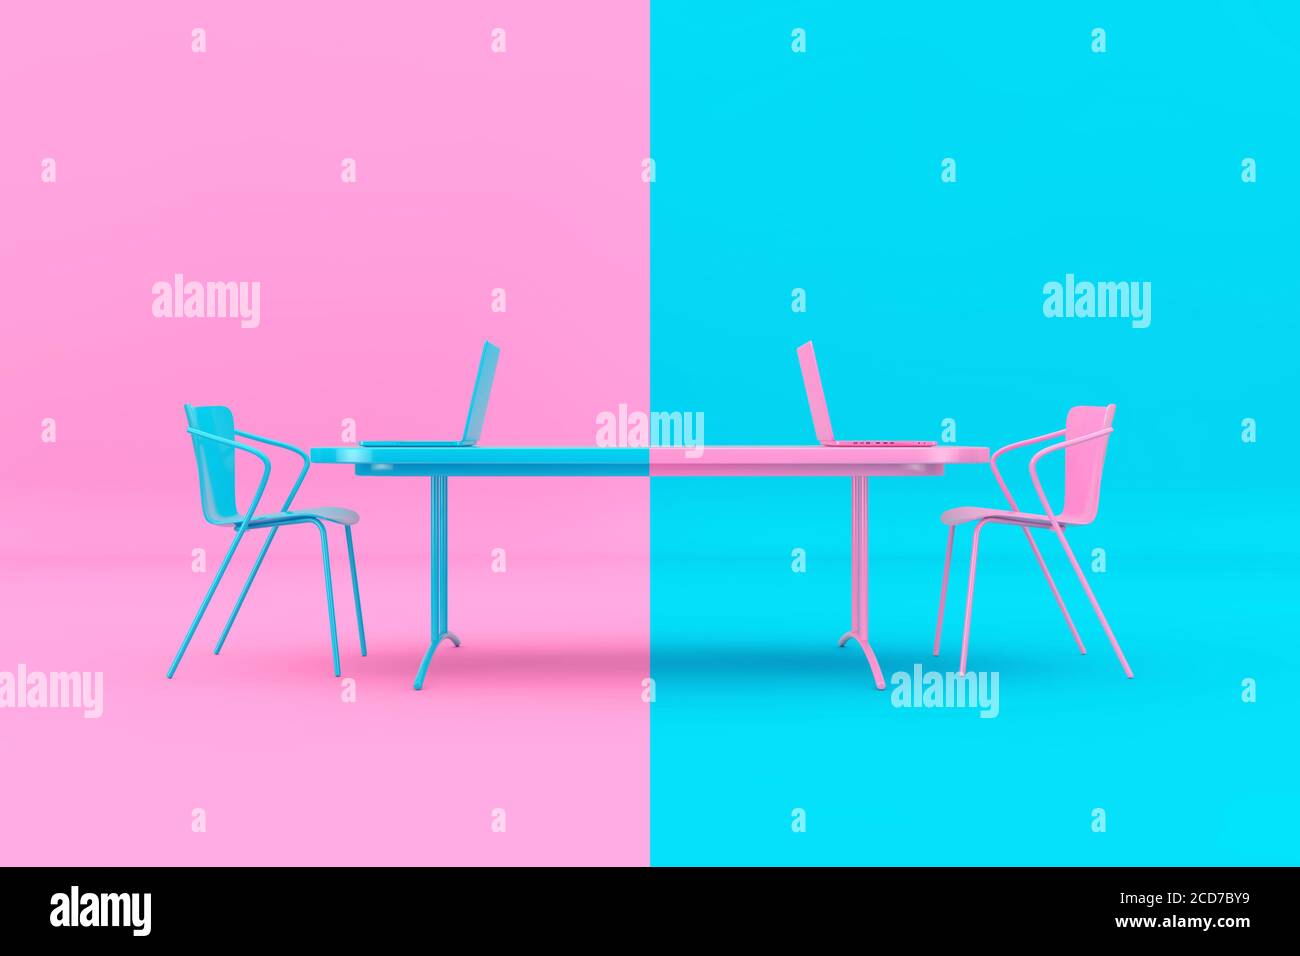 Confrontation Concept. Pink and Blue Chairs, Laptops and Desk as Duotone Style in front of pink and blue background. 3d Rendering Stock Photo